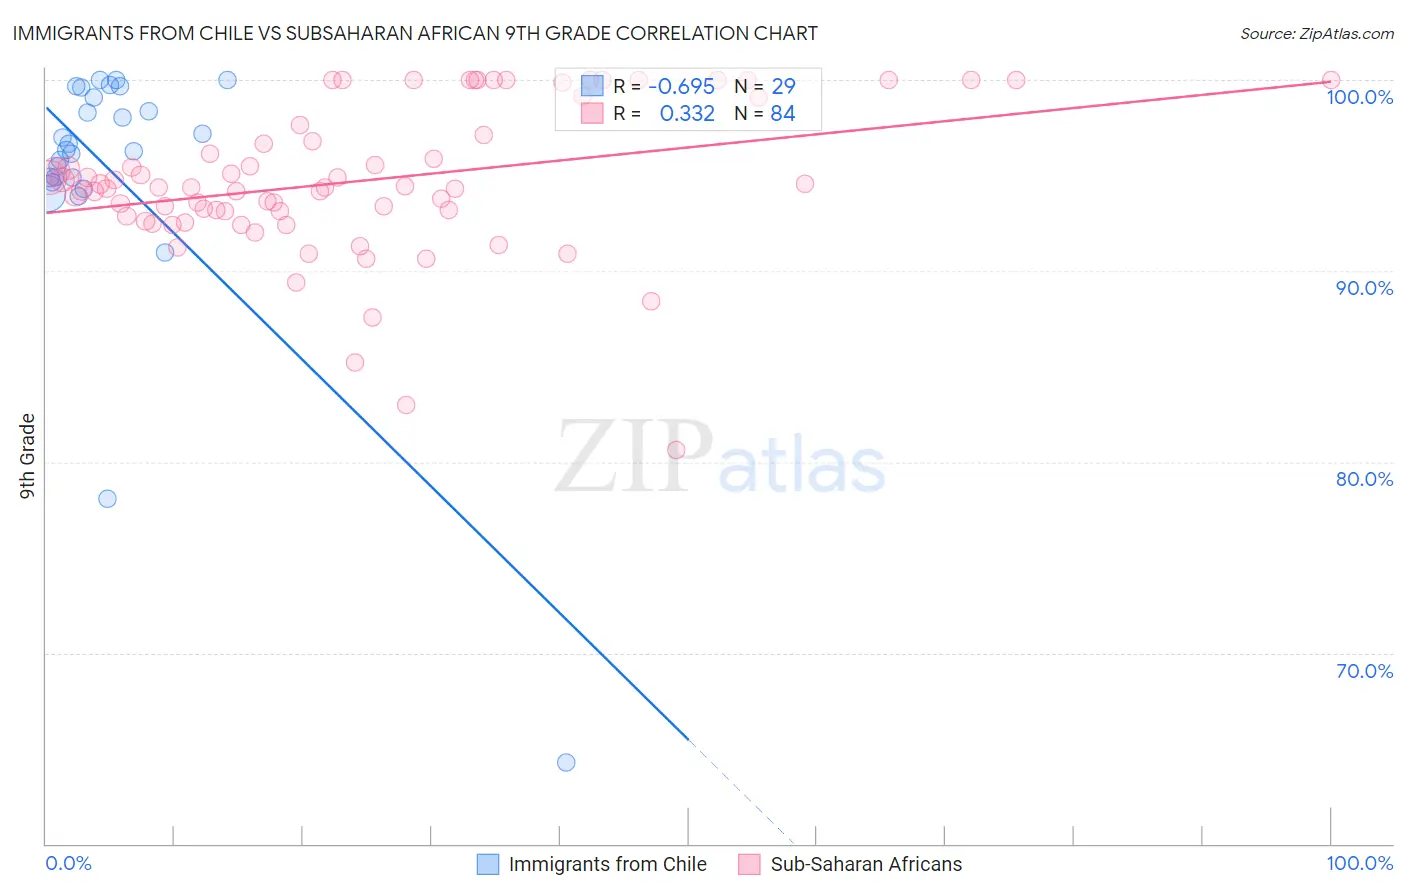 Immigrants from Chile vs Subsaharan African 9th Grade